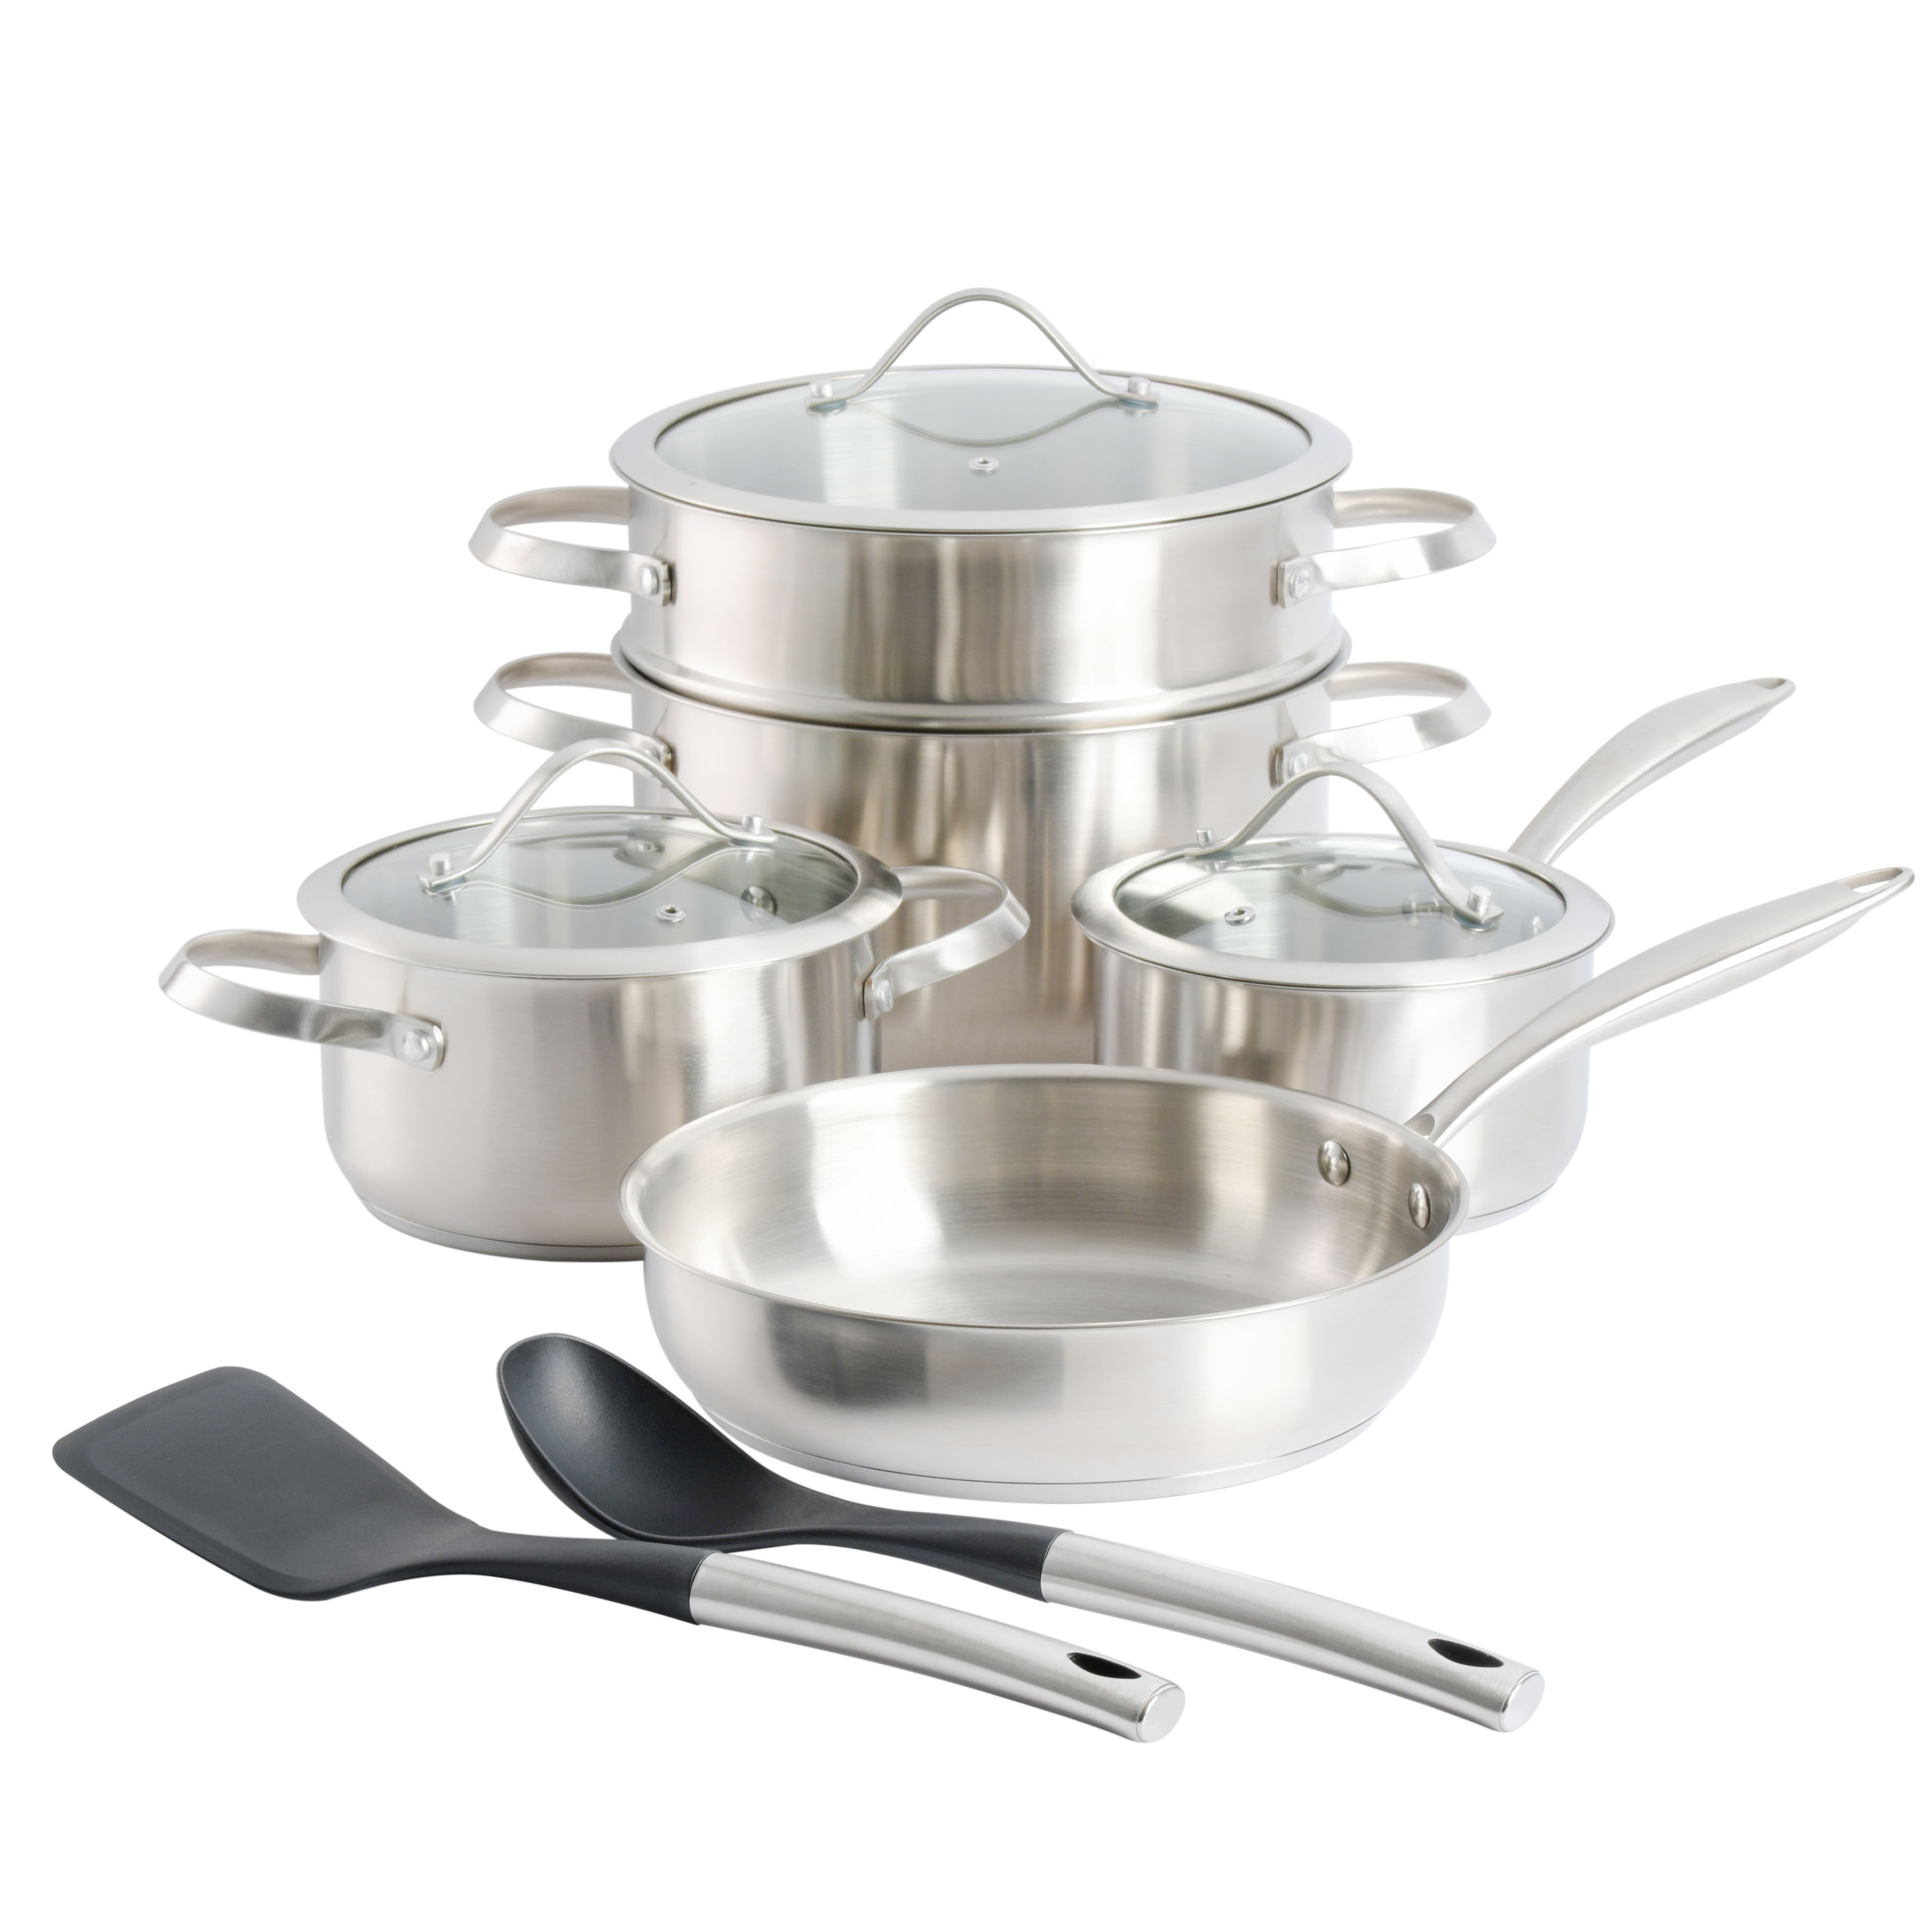 Kenmore Aiden Stainless Steel Cookware Set with Kitchen Tools, 10-piece, Brushed Stainless Steel